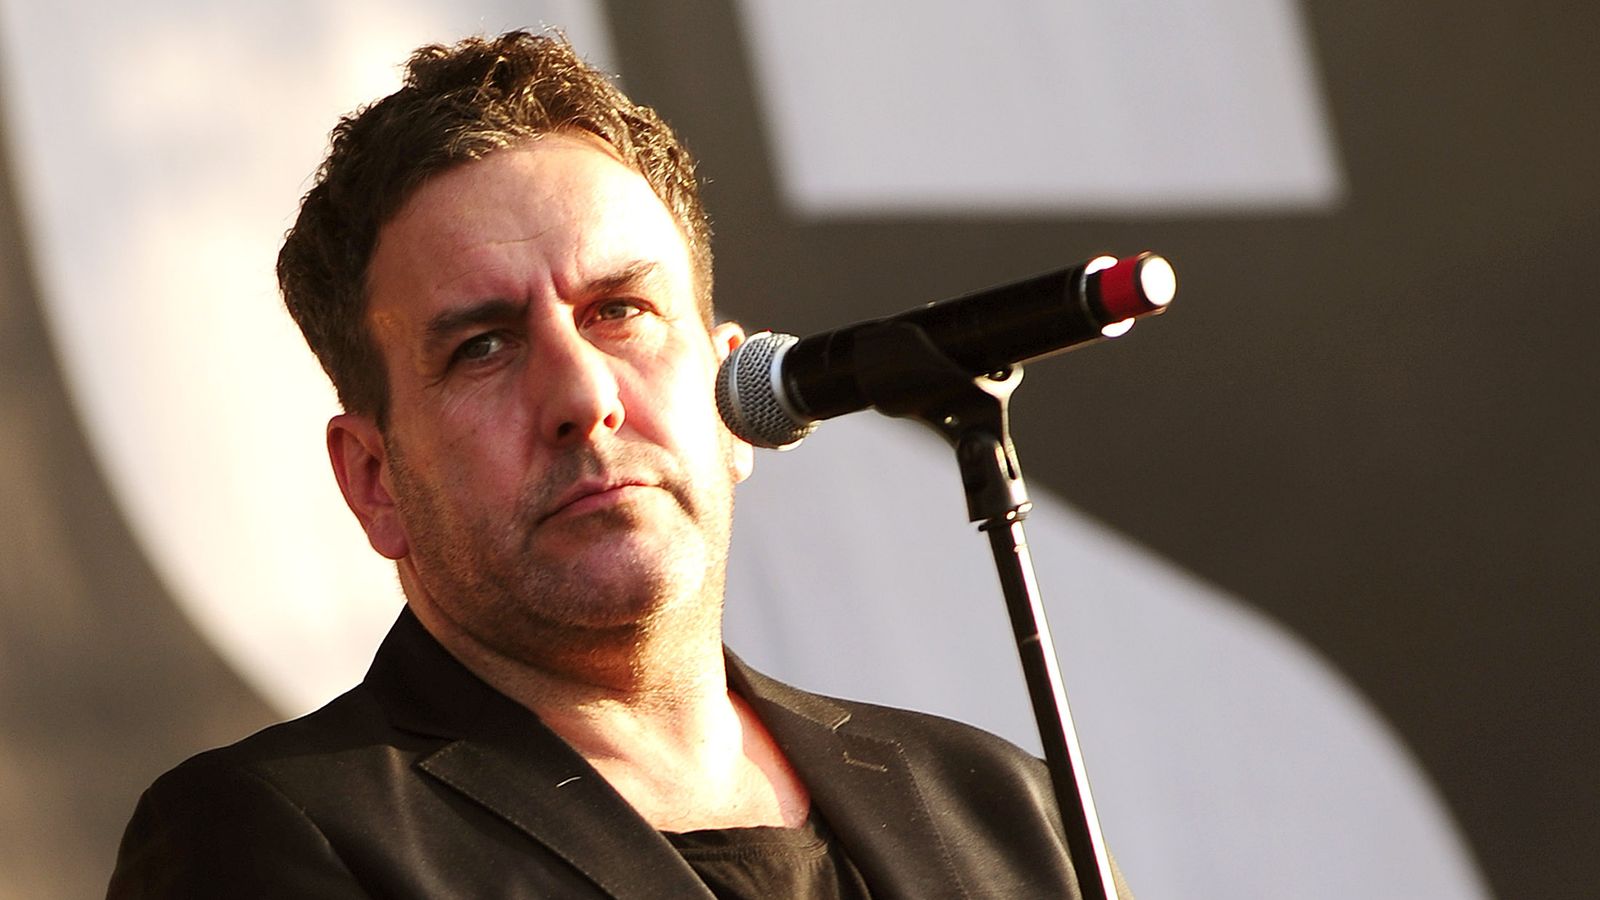 Terry Hall: The Specials singer was diagnosed with cancer before his death, bandmate reveals